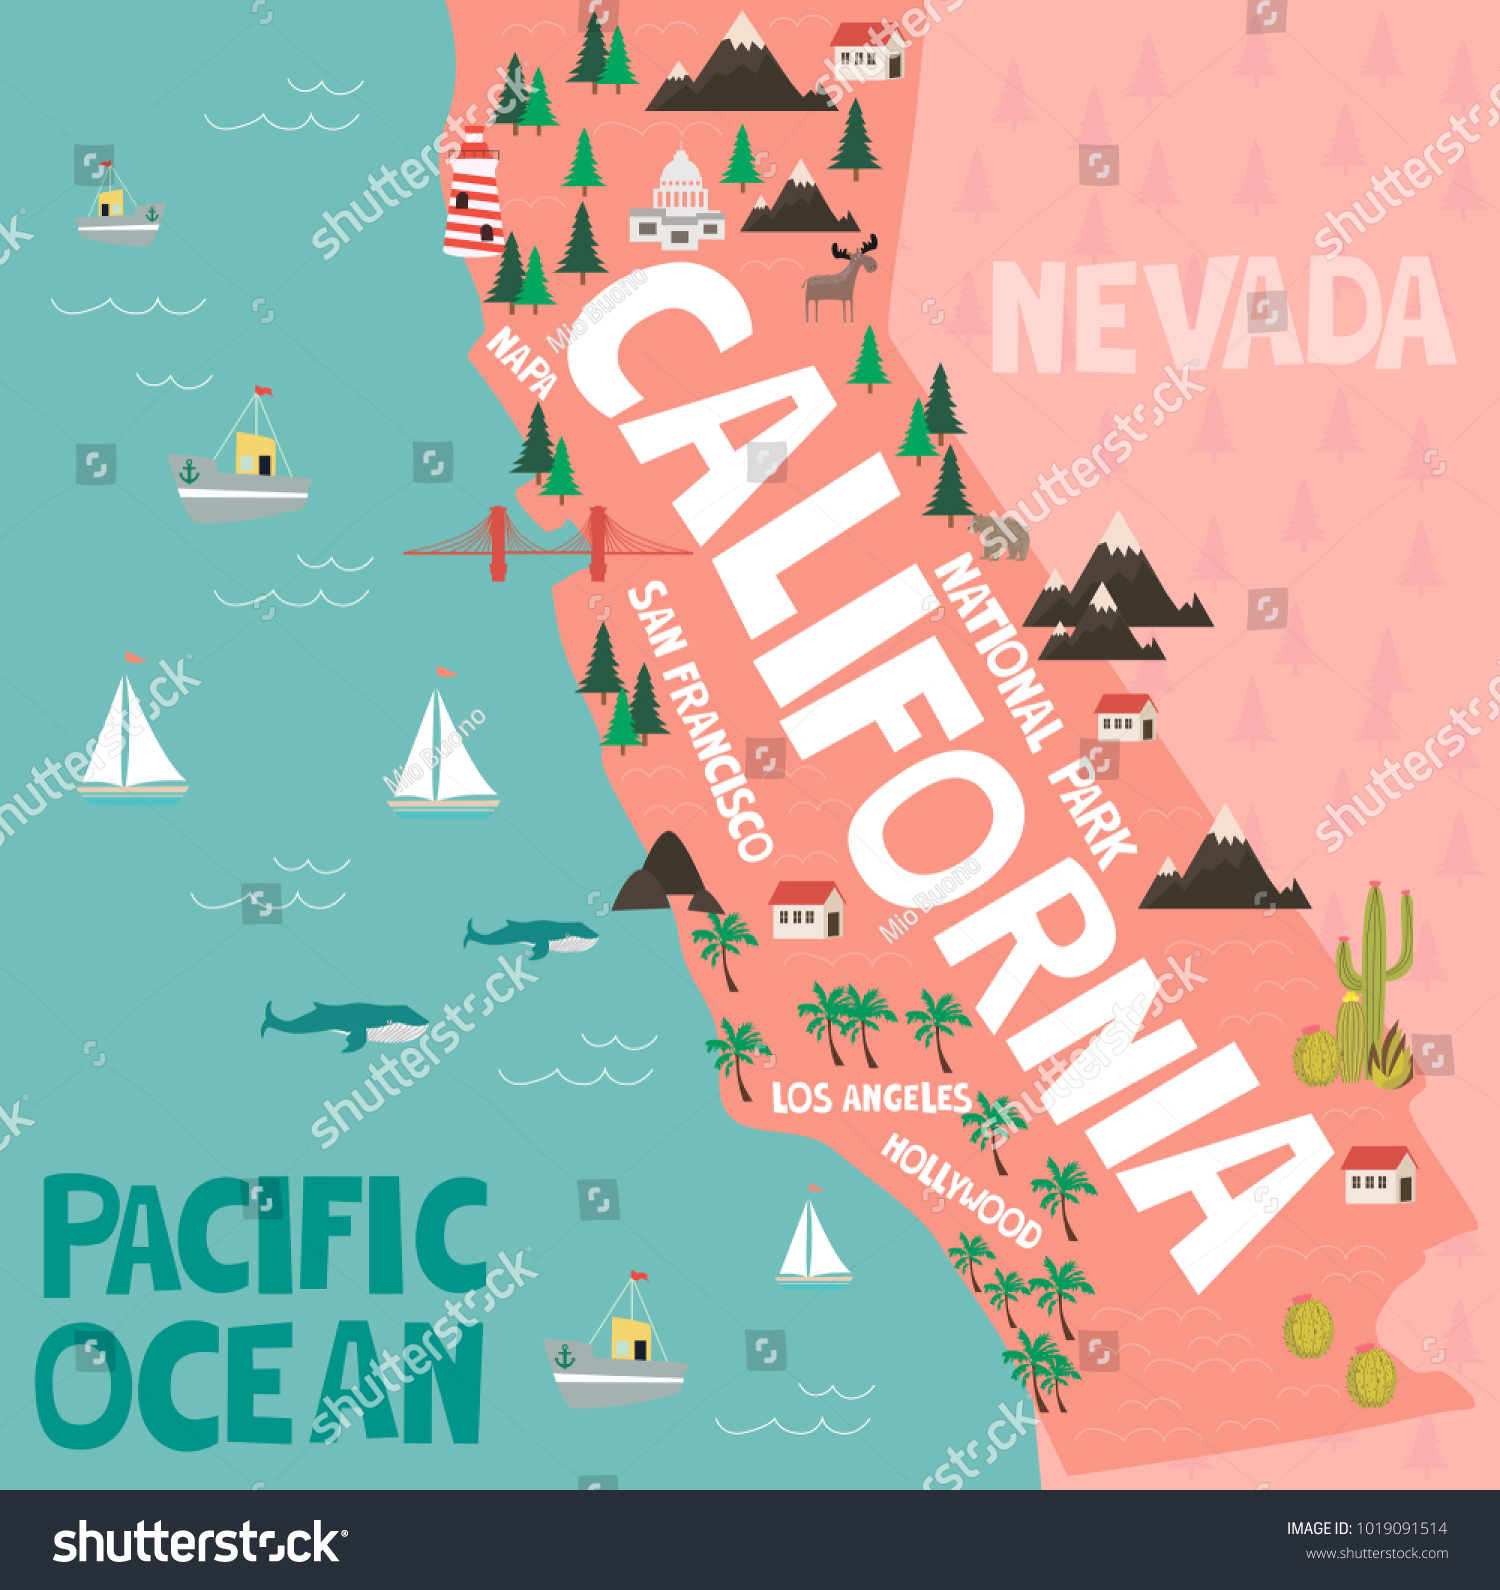 Illustrated Map State California United States Image Vectorielle De - Illustrated Map Of California